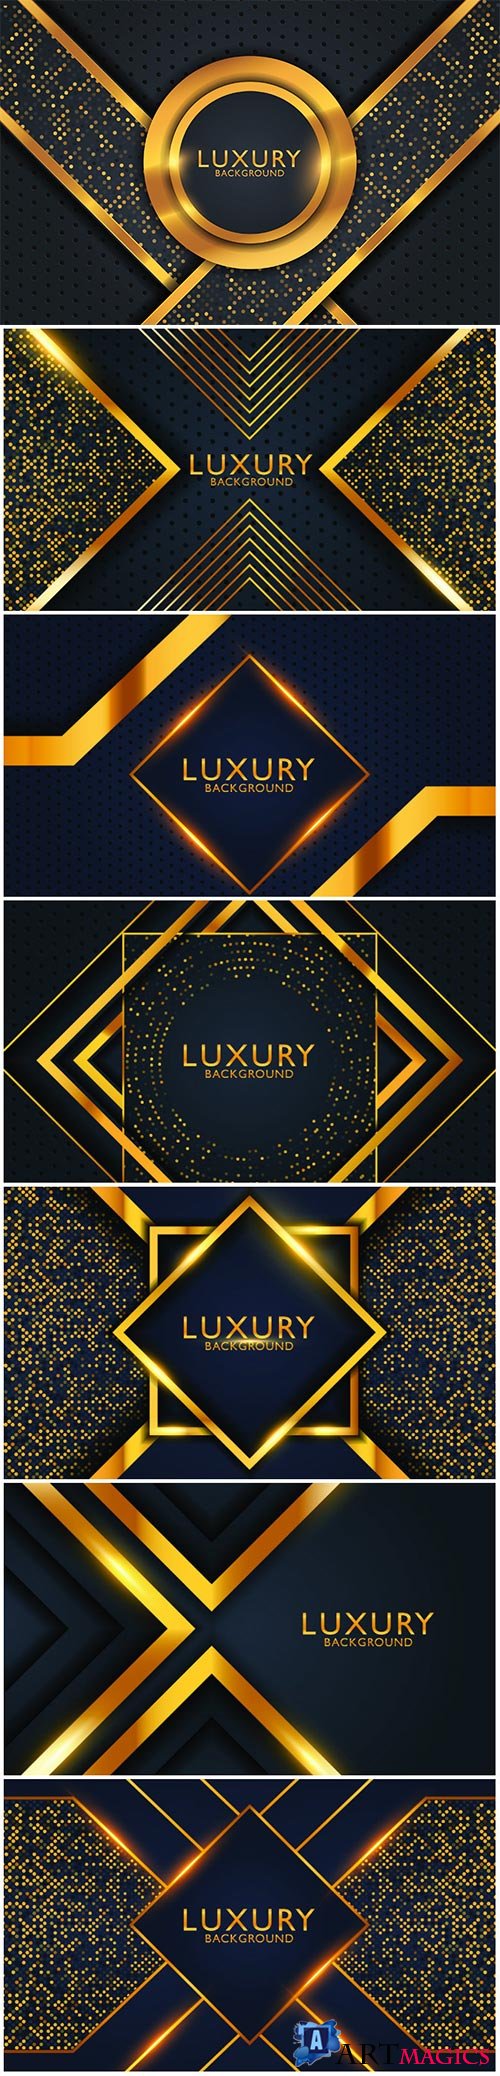 Geometric luxury gold metal background. Graphic design element for invitation, cover